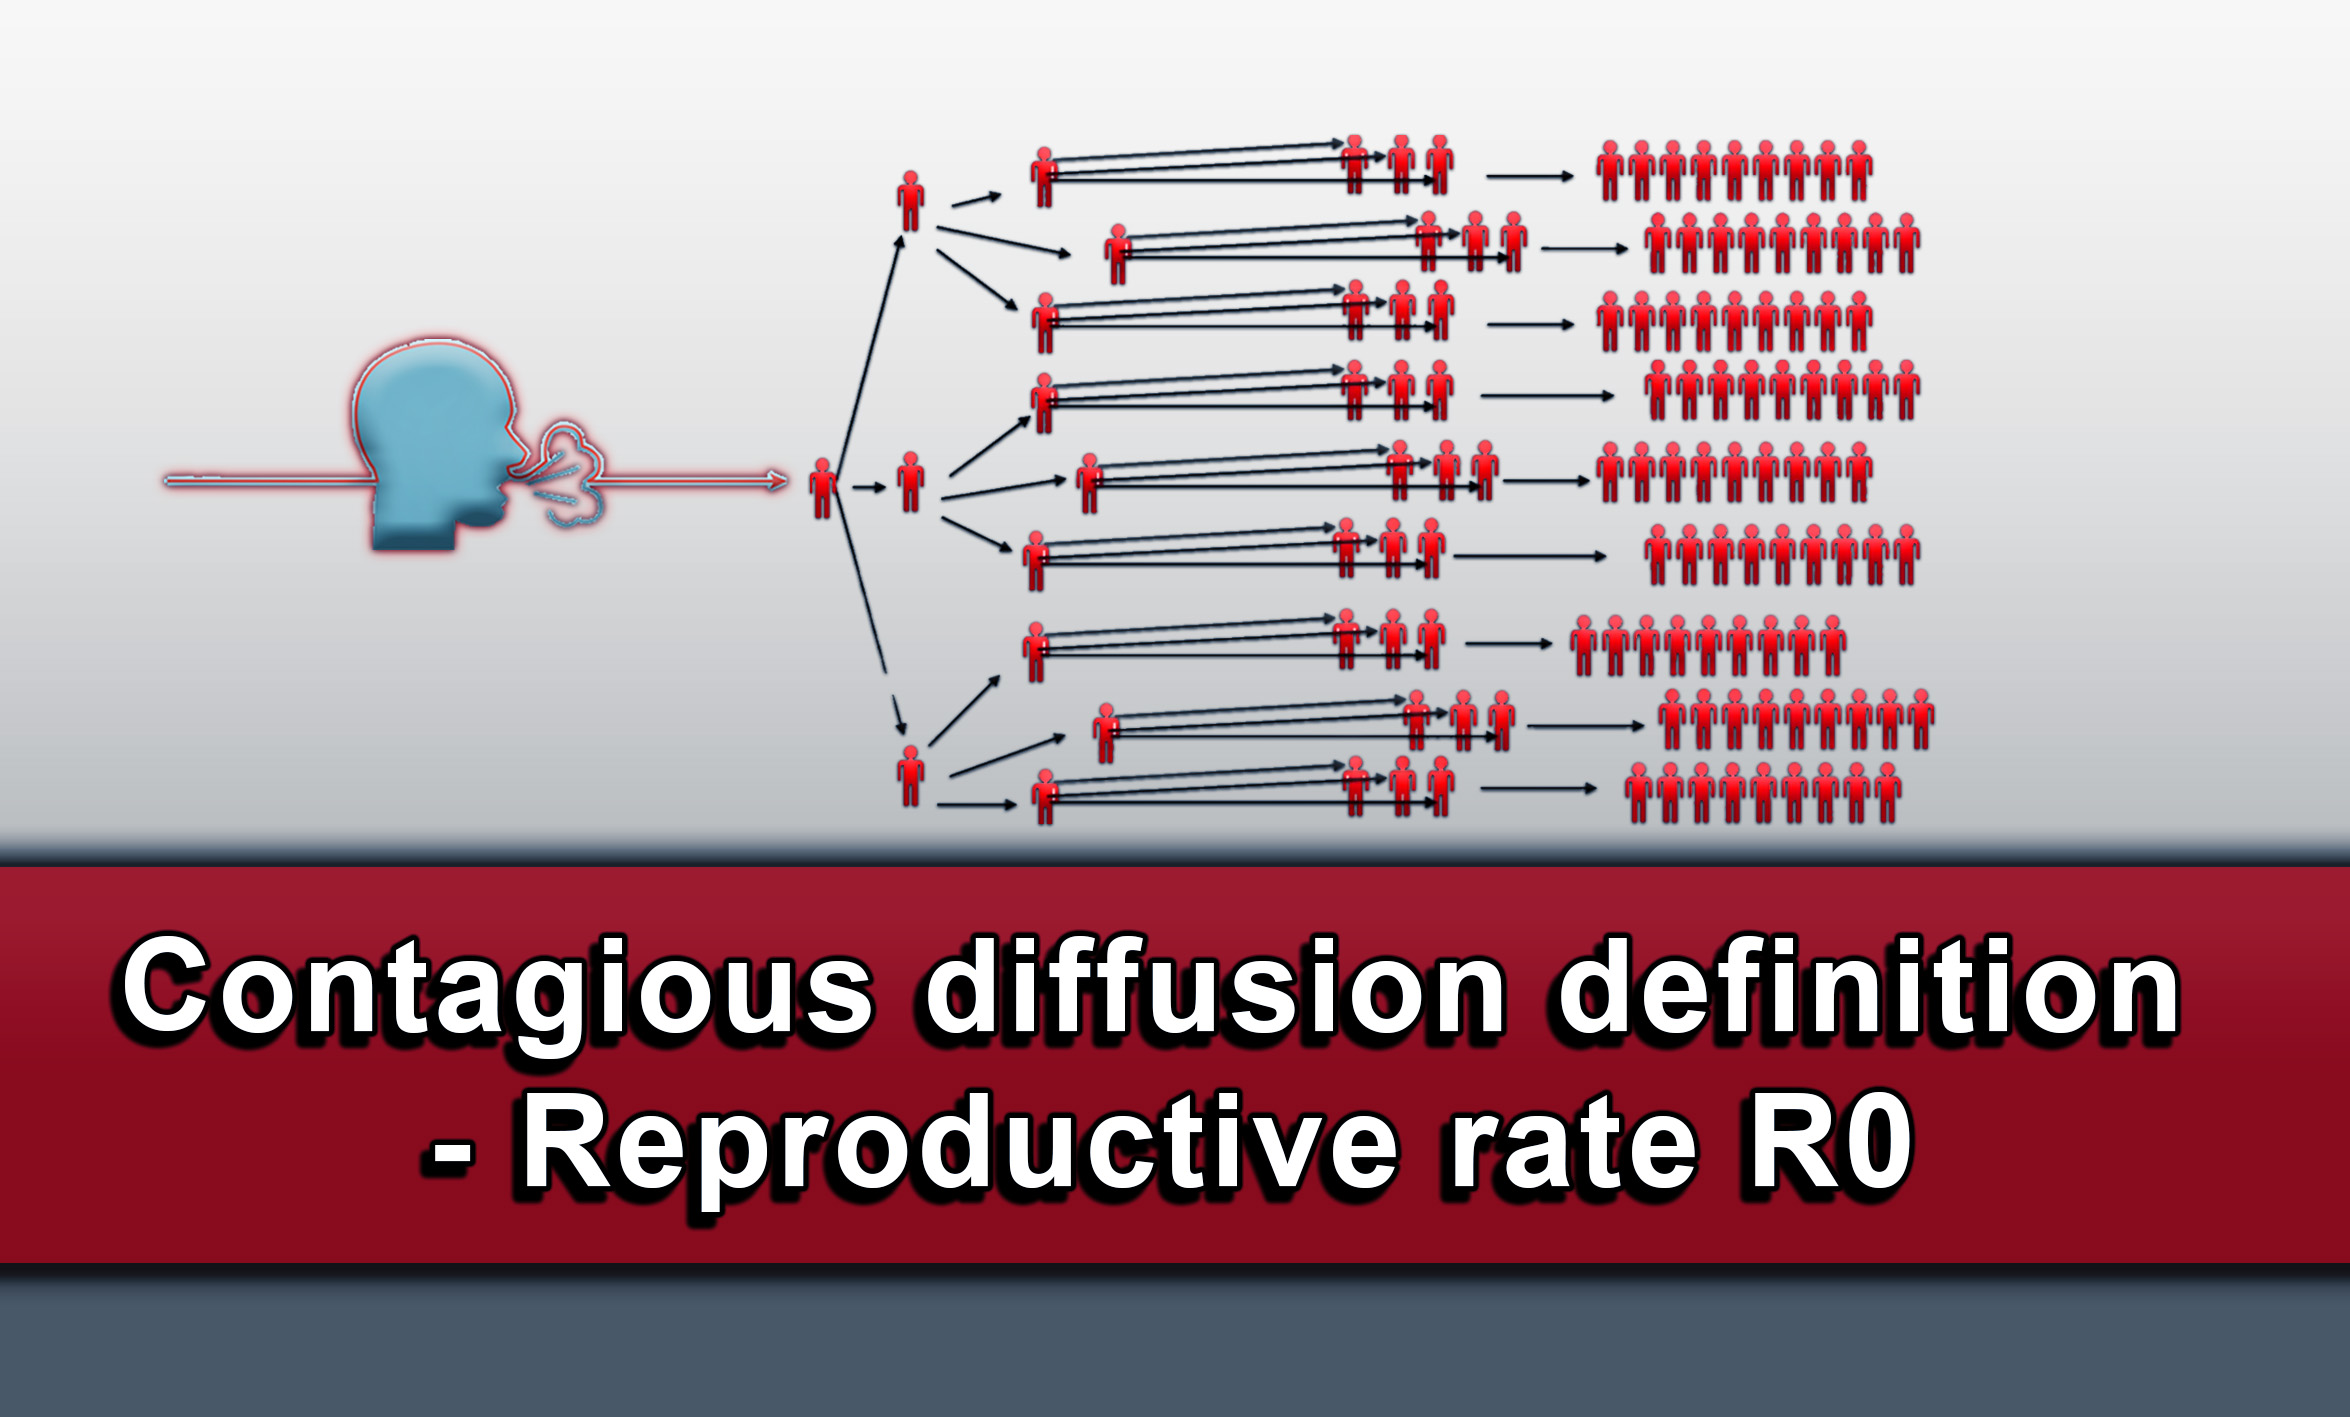 Contagious diffusion definition - Reproductive rate R0